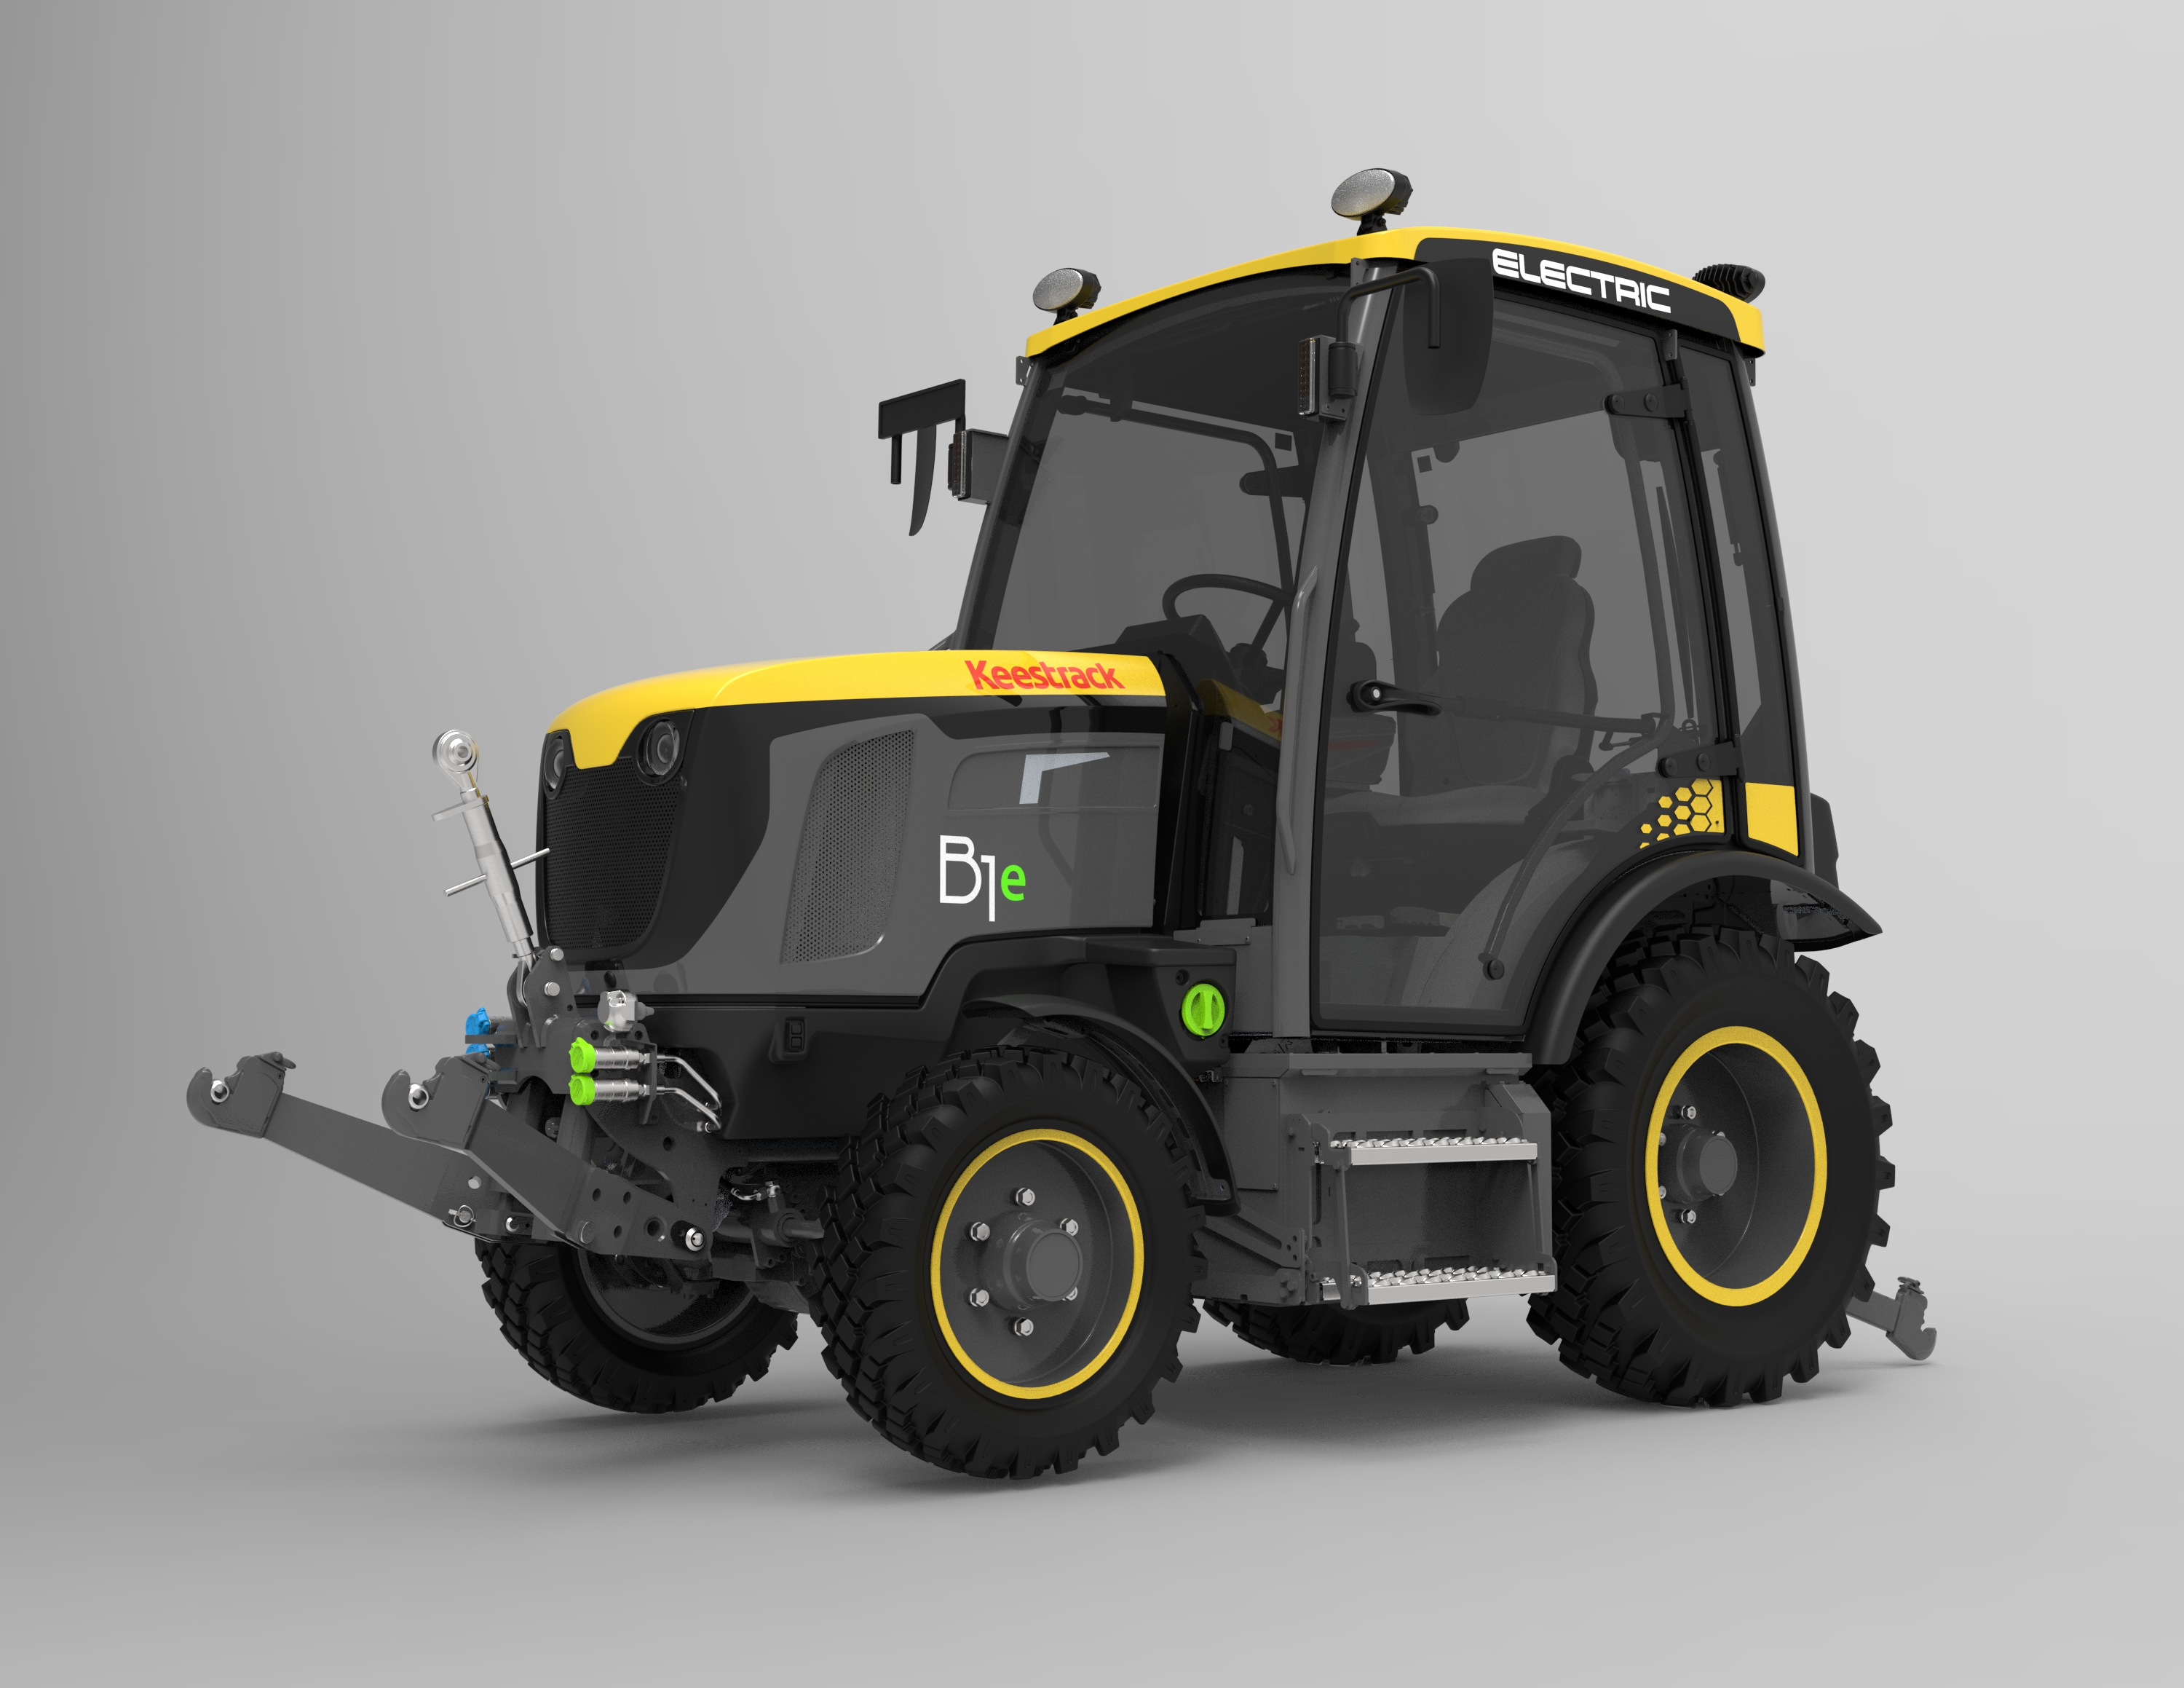 The Keestrack B1e Model will be the first 100% electric tractor